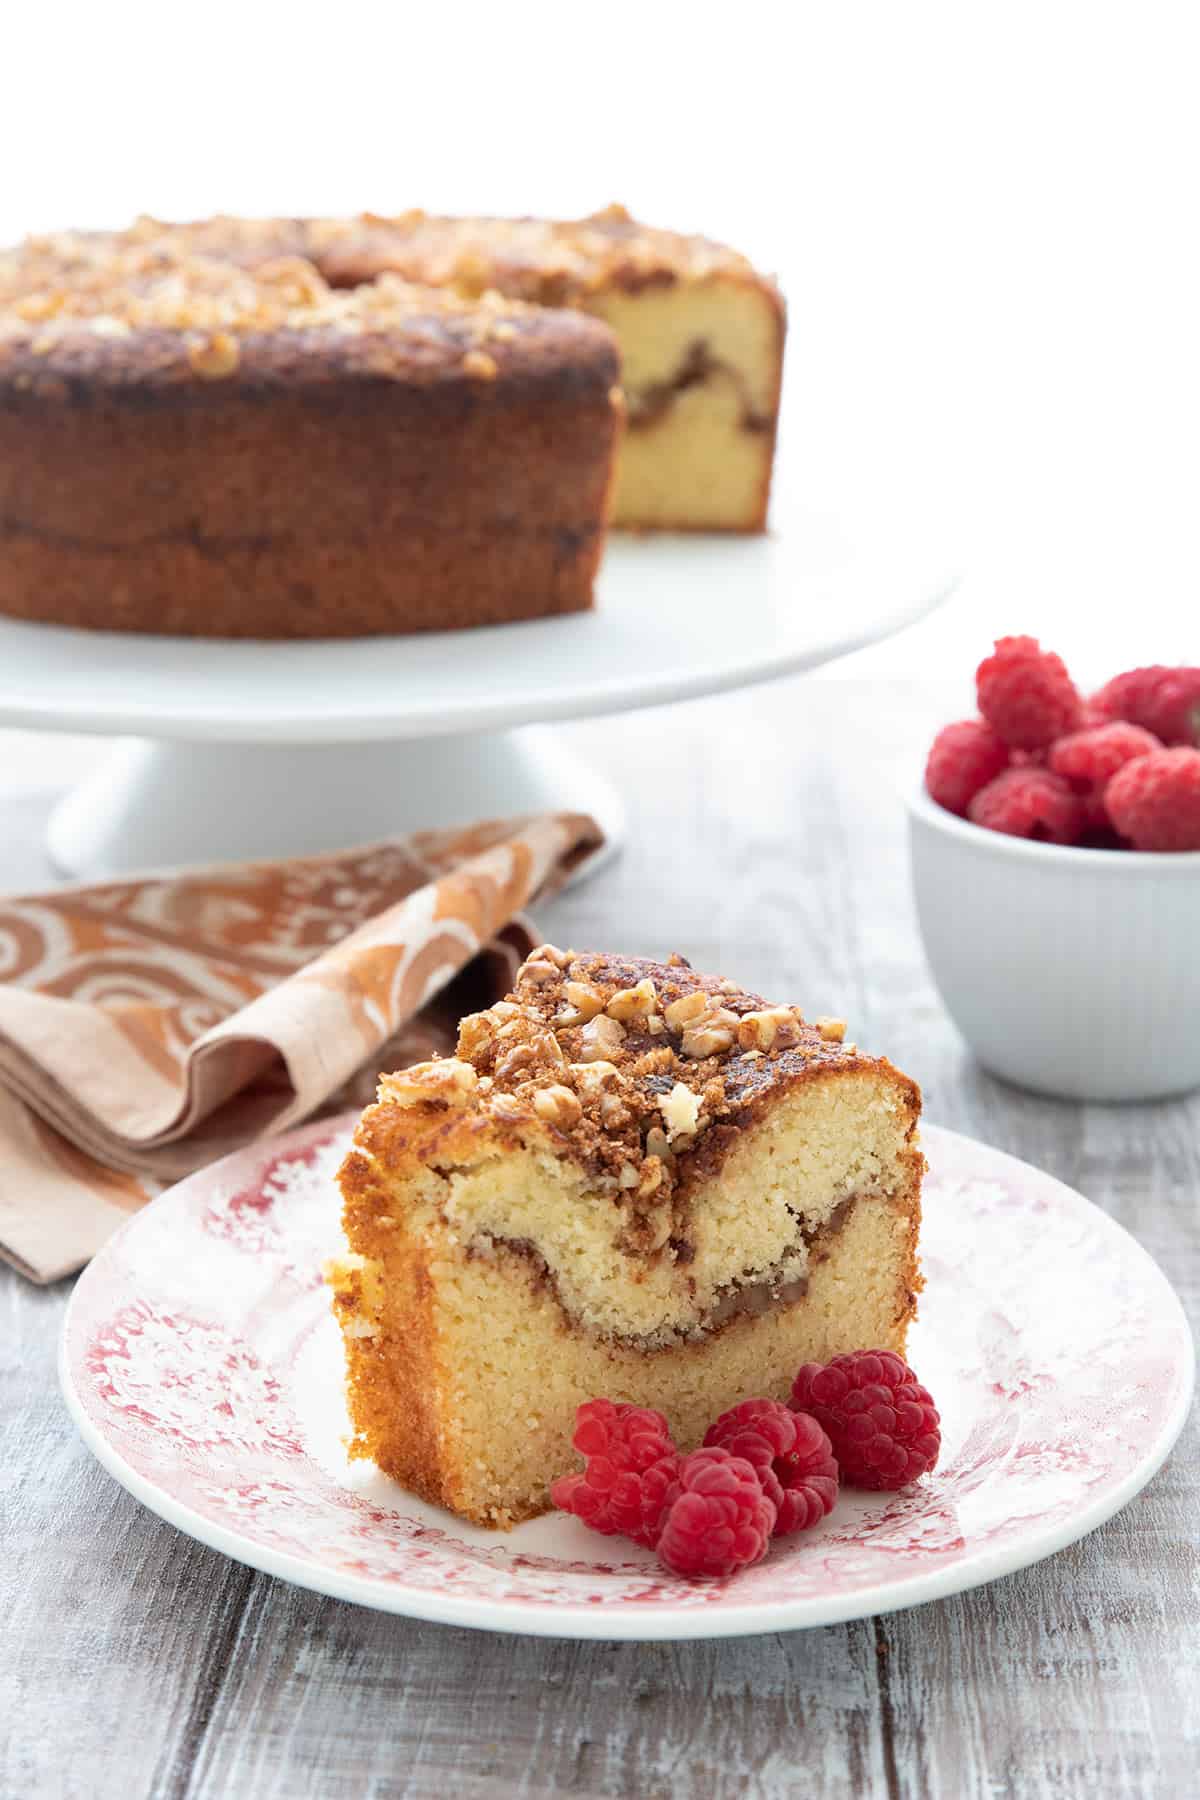 A slice of keto coffee cake on a plate, in front of the rest of the cake on a cake stand. A bowl of raspberries in the background.